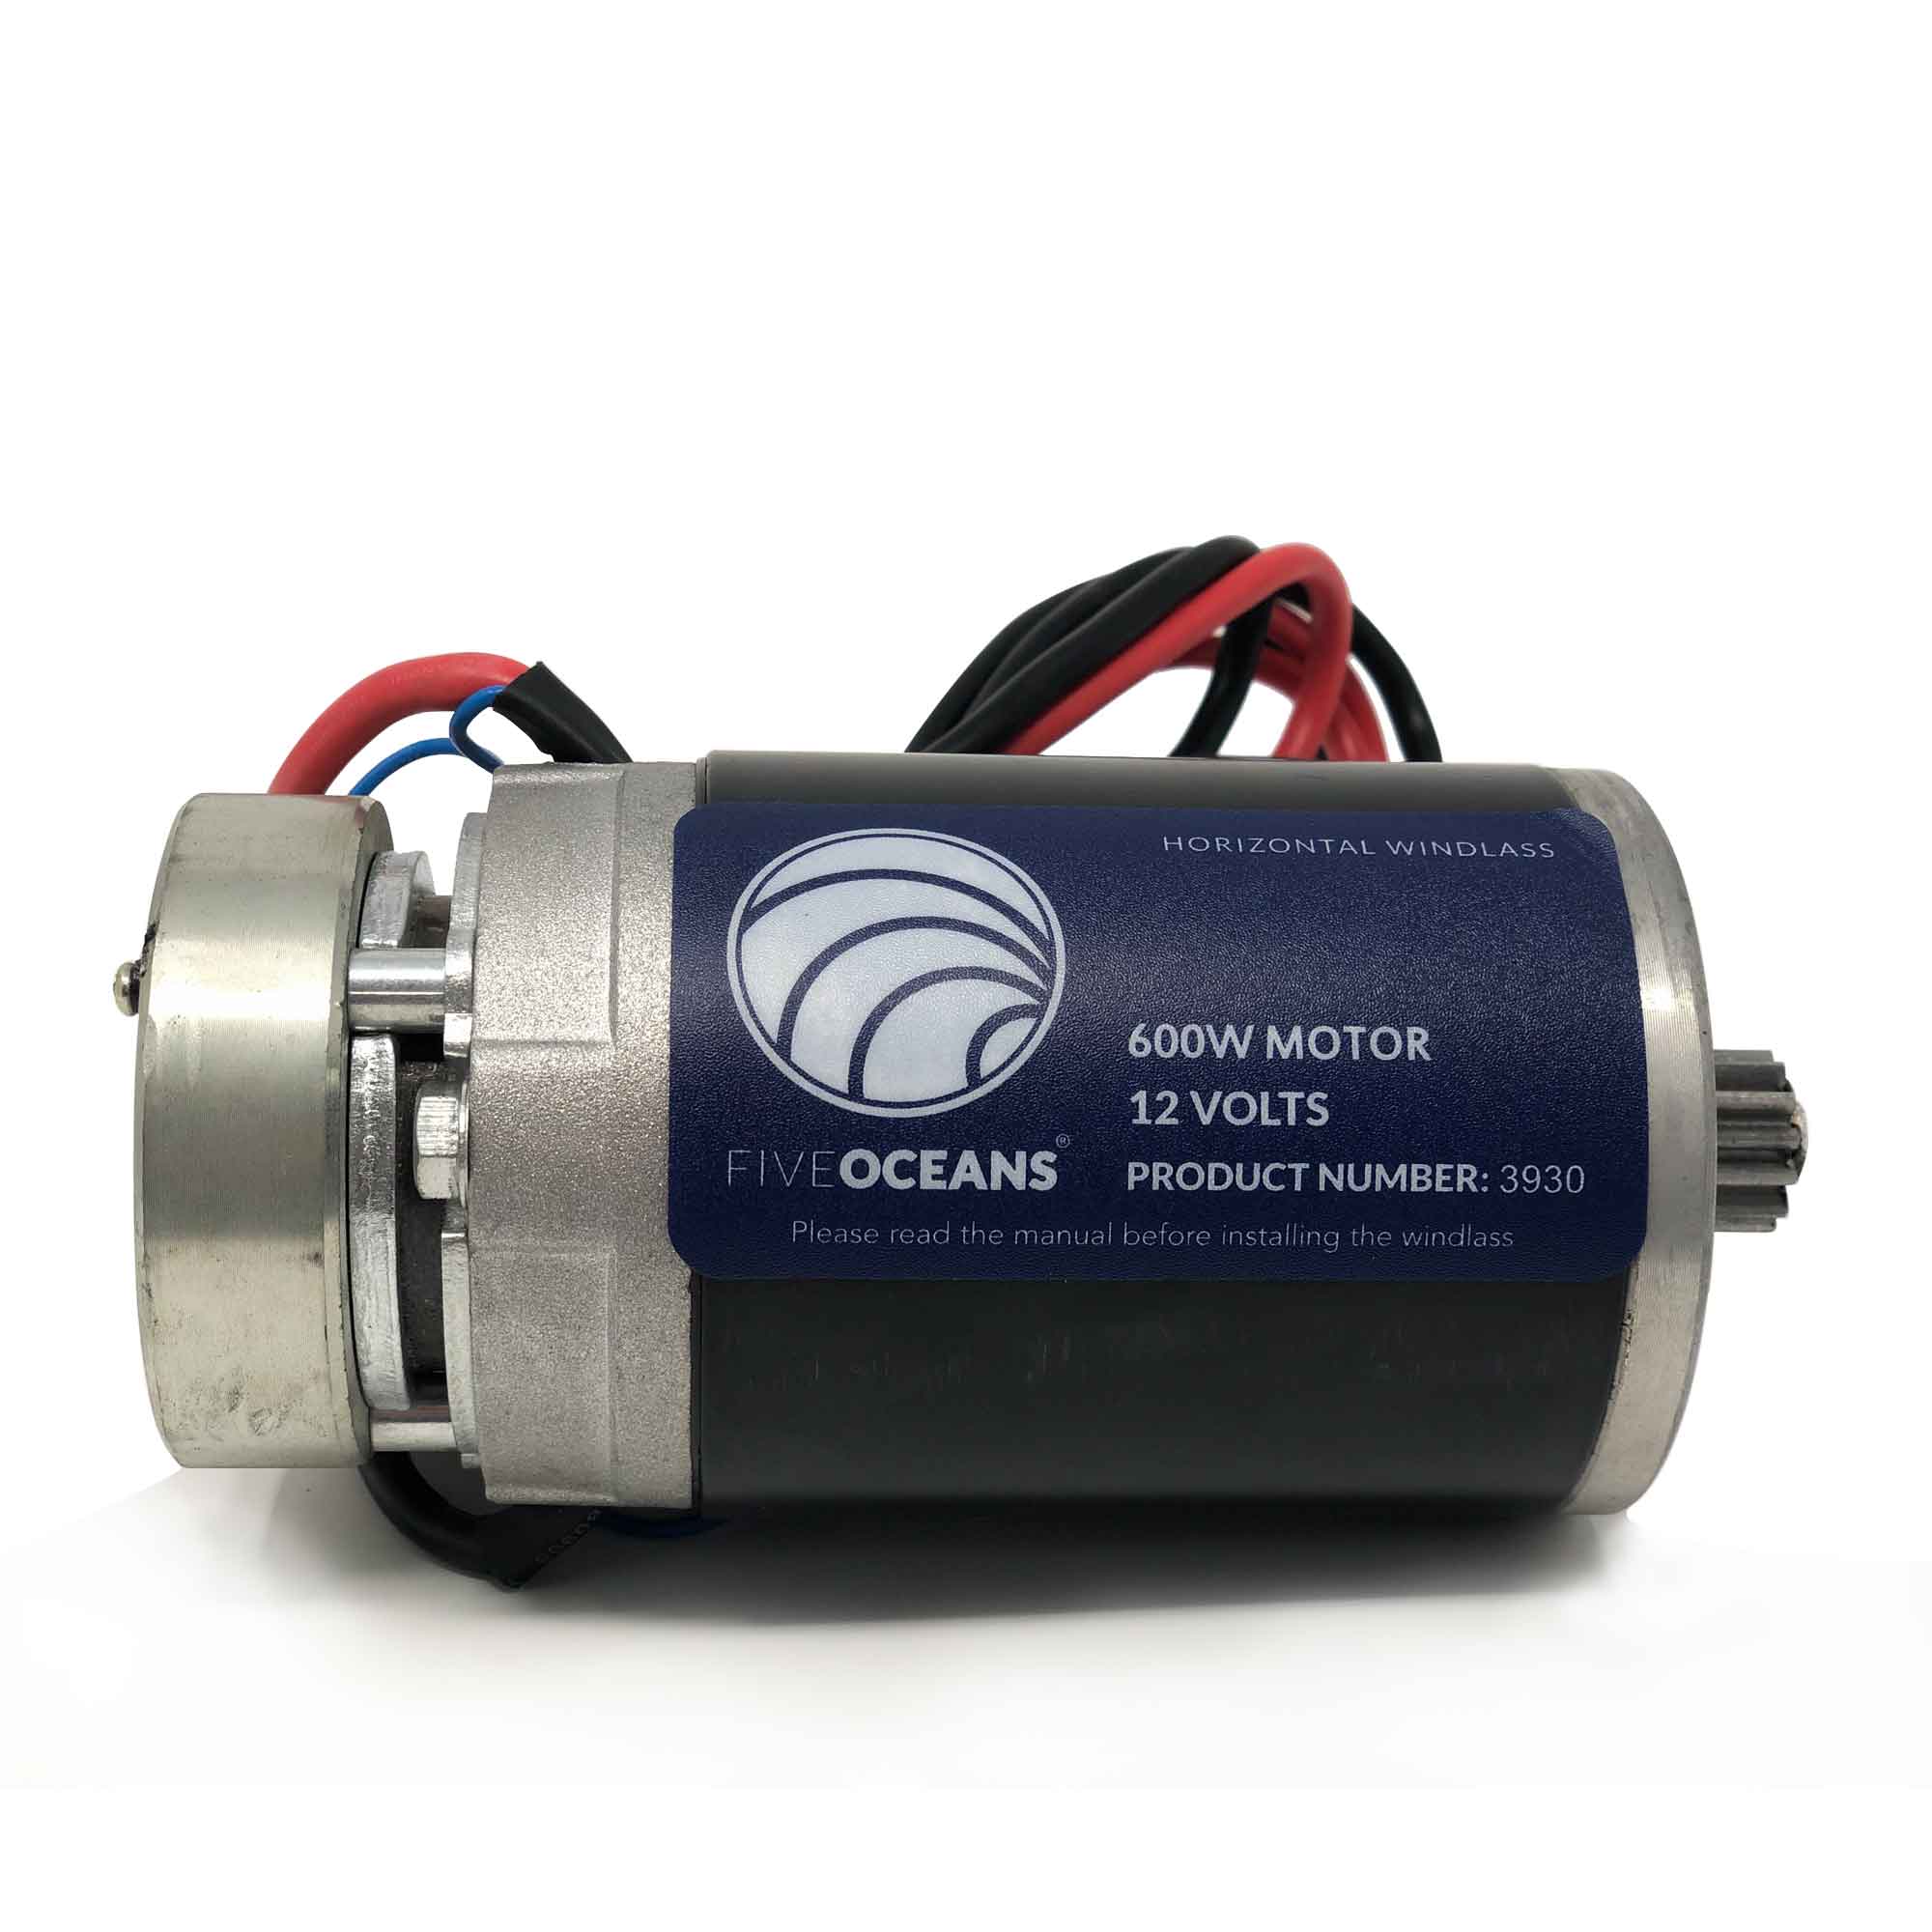 Replacement Motor for Atlantic 600 (FO-3930) - FO4259